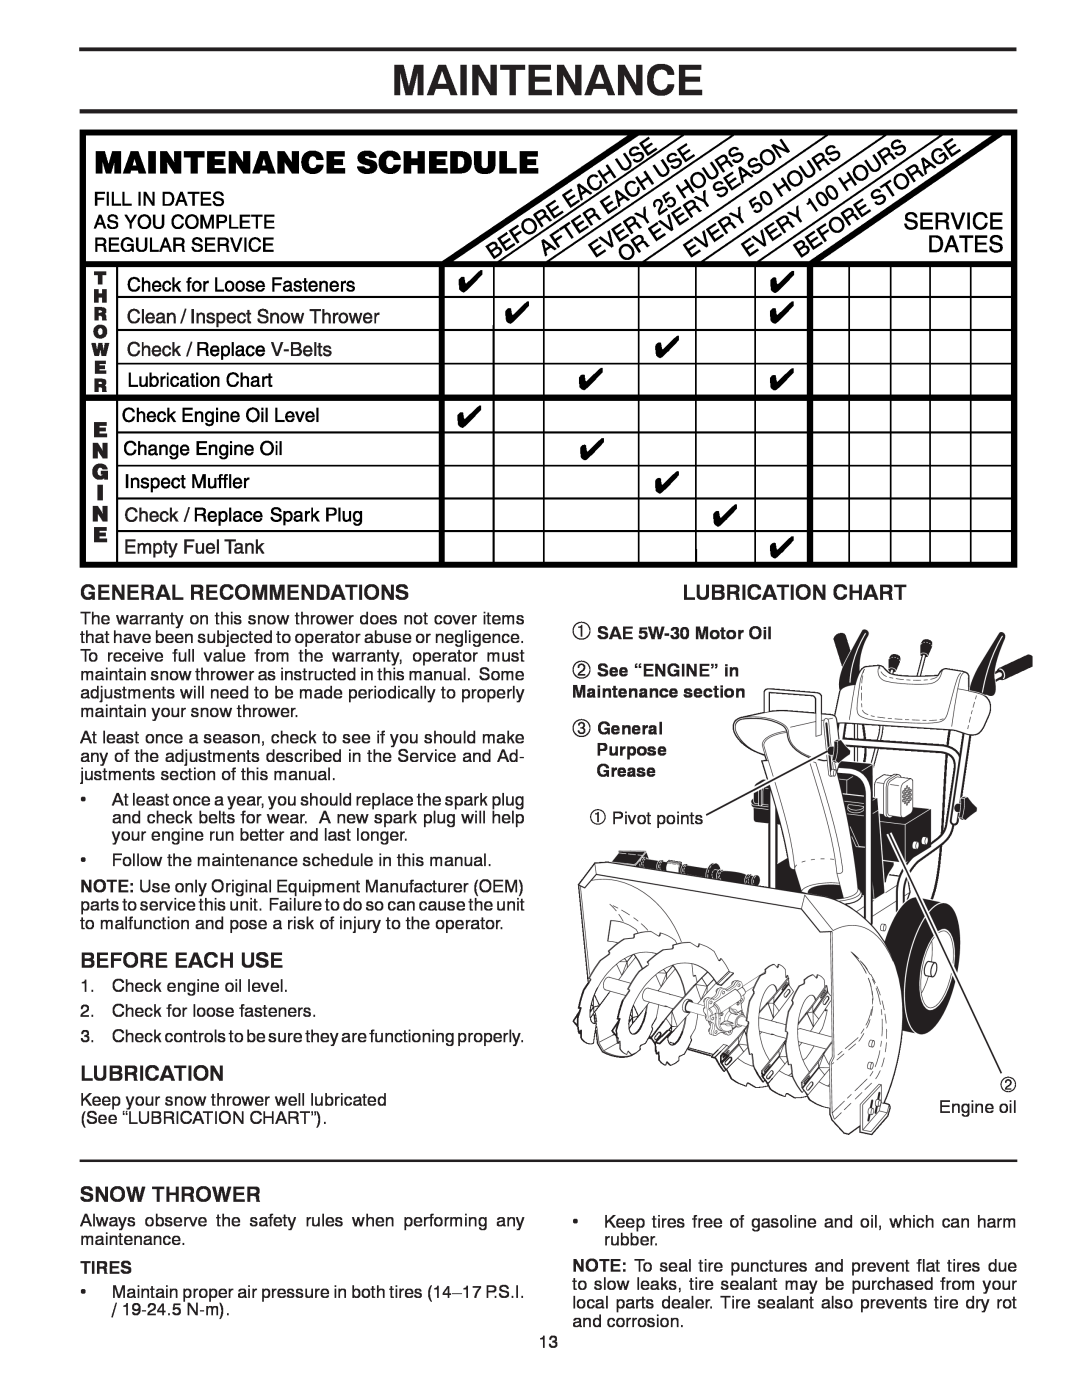 Poulan 421888 Maintenance, General Recommendations, Before Each Use, Snow Thrower, Lubrication Chart, Purpose Grease 